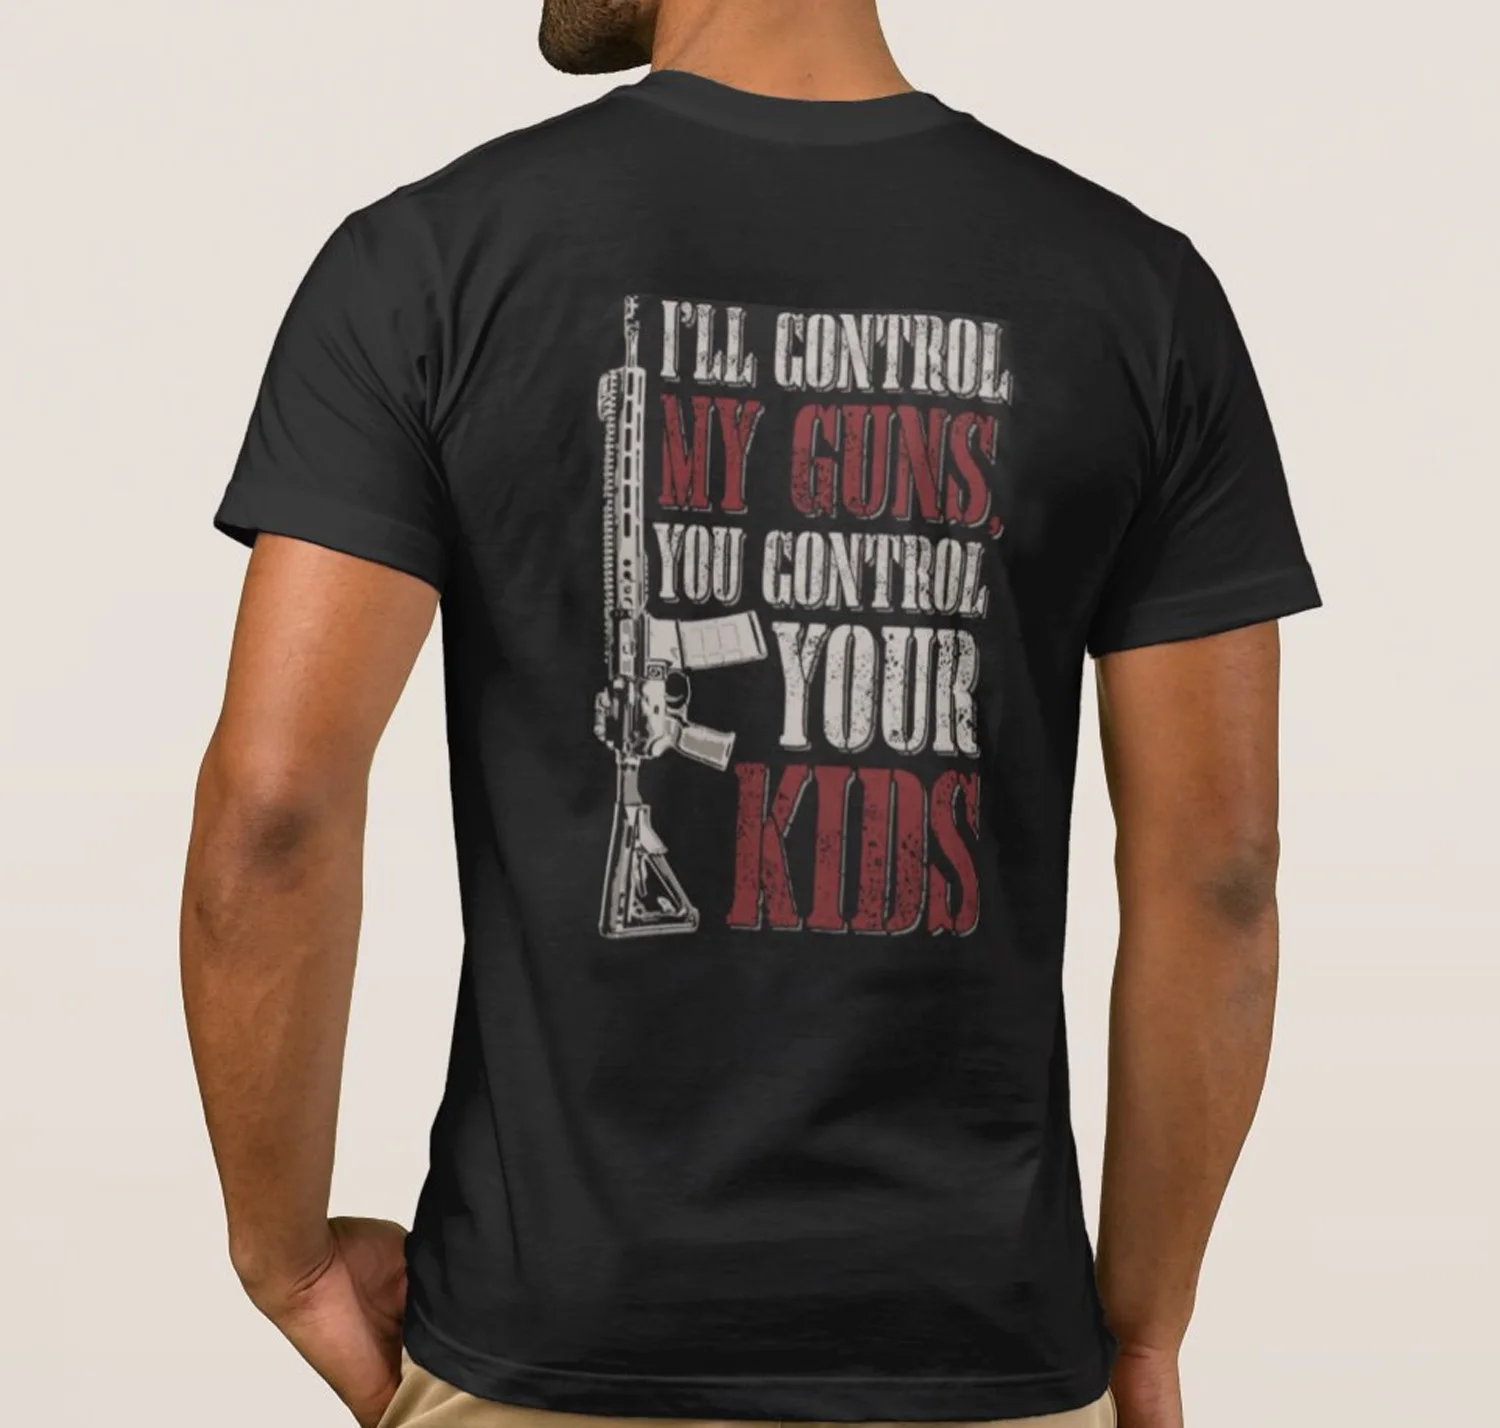 

I'll Control My Guns You Control Your Kids Men's T Shirt. Americans Who Support The 2nd Amendment and The Freedom It Protects.